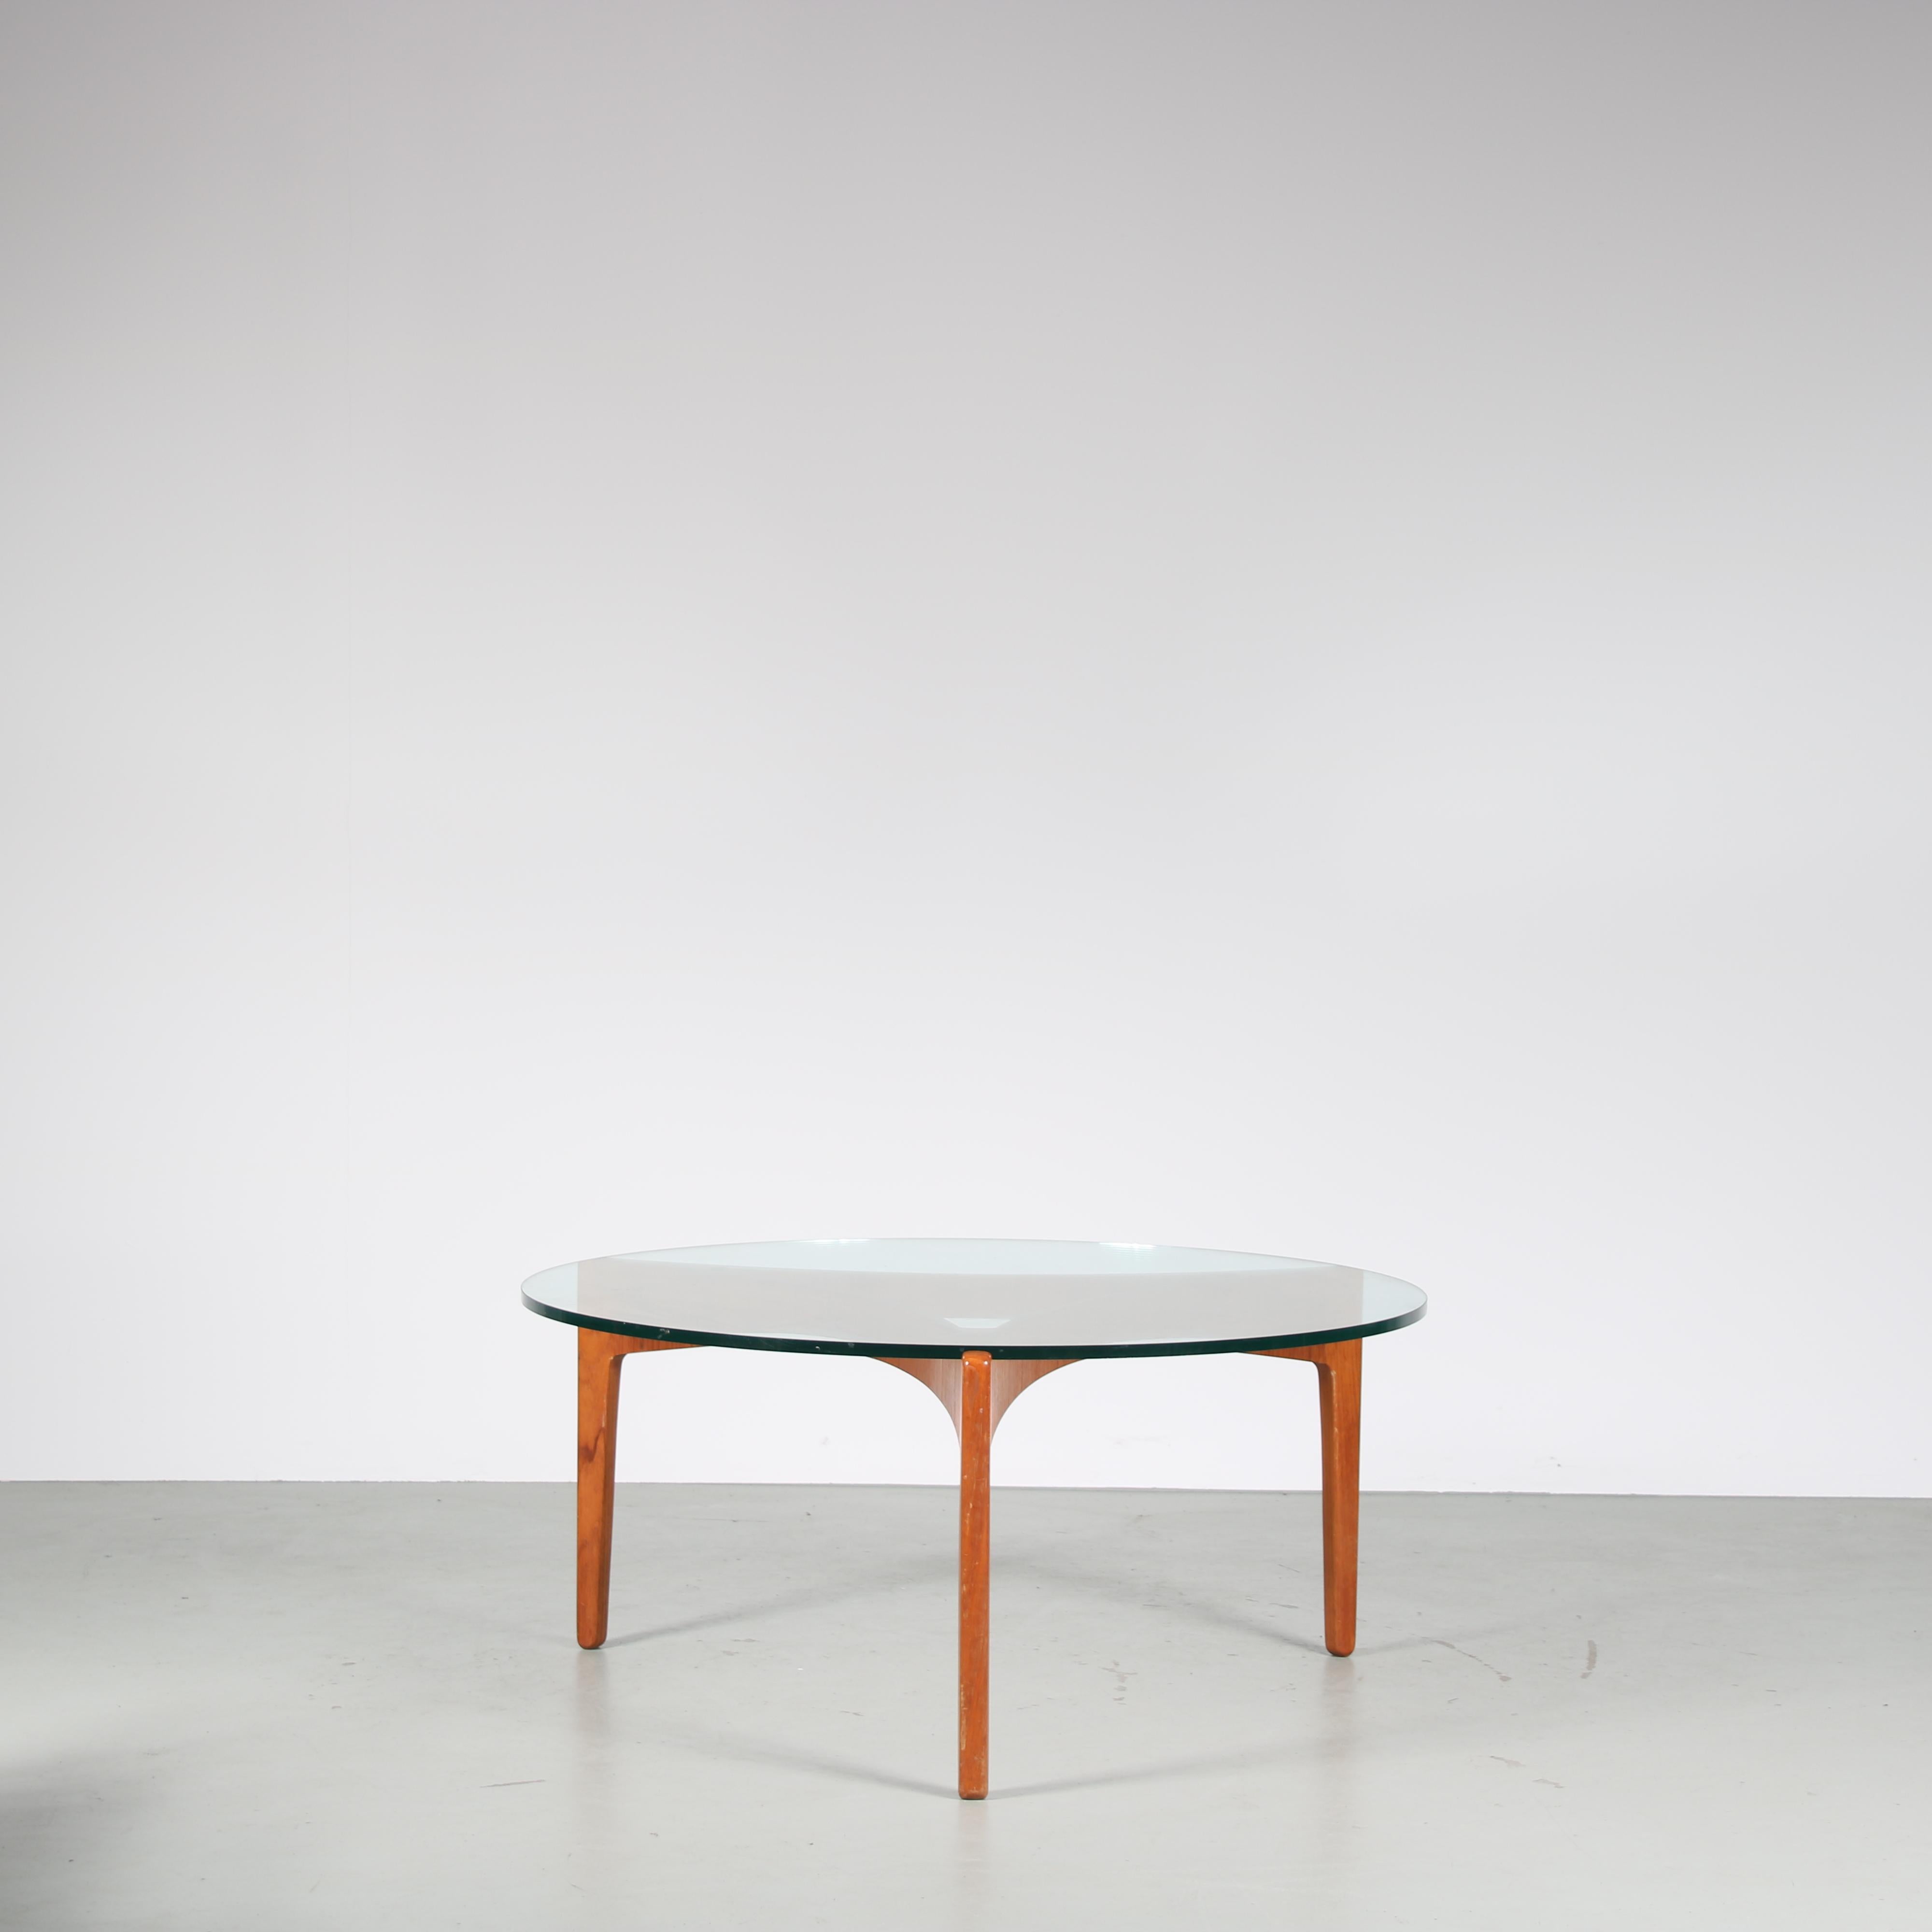 A beautiful coffee table designed by Sven Ellekae, manufactured by Christian Linneberg Mobelfabrik in Denmark around 1960.

This eye-catching table has a high quality teak wooden frame with three legs in elegant shape. A smooth triangle shape